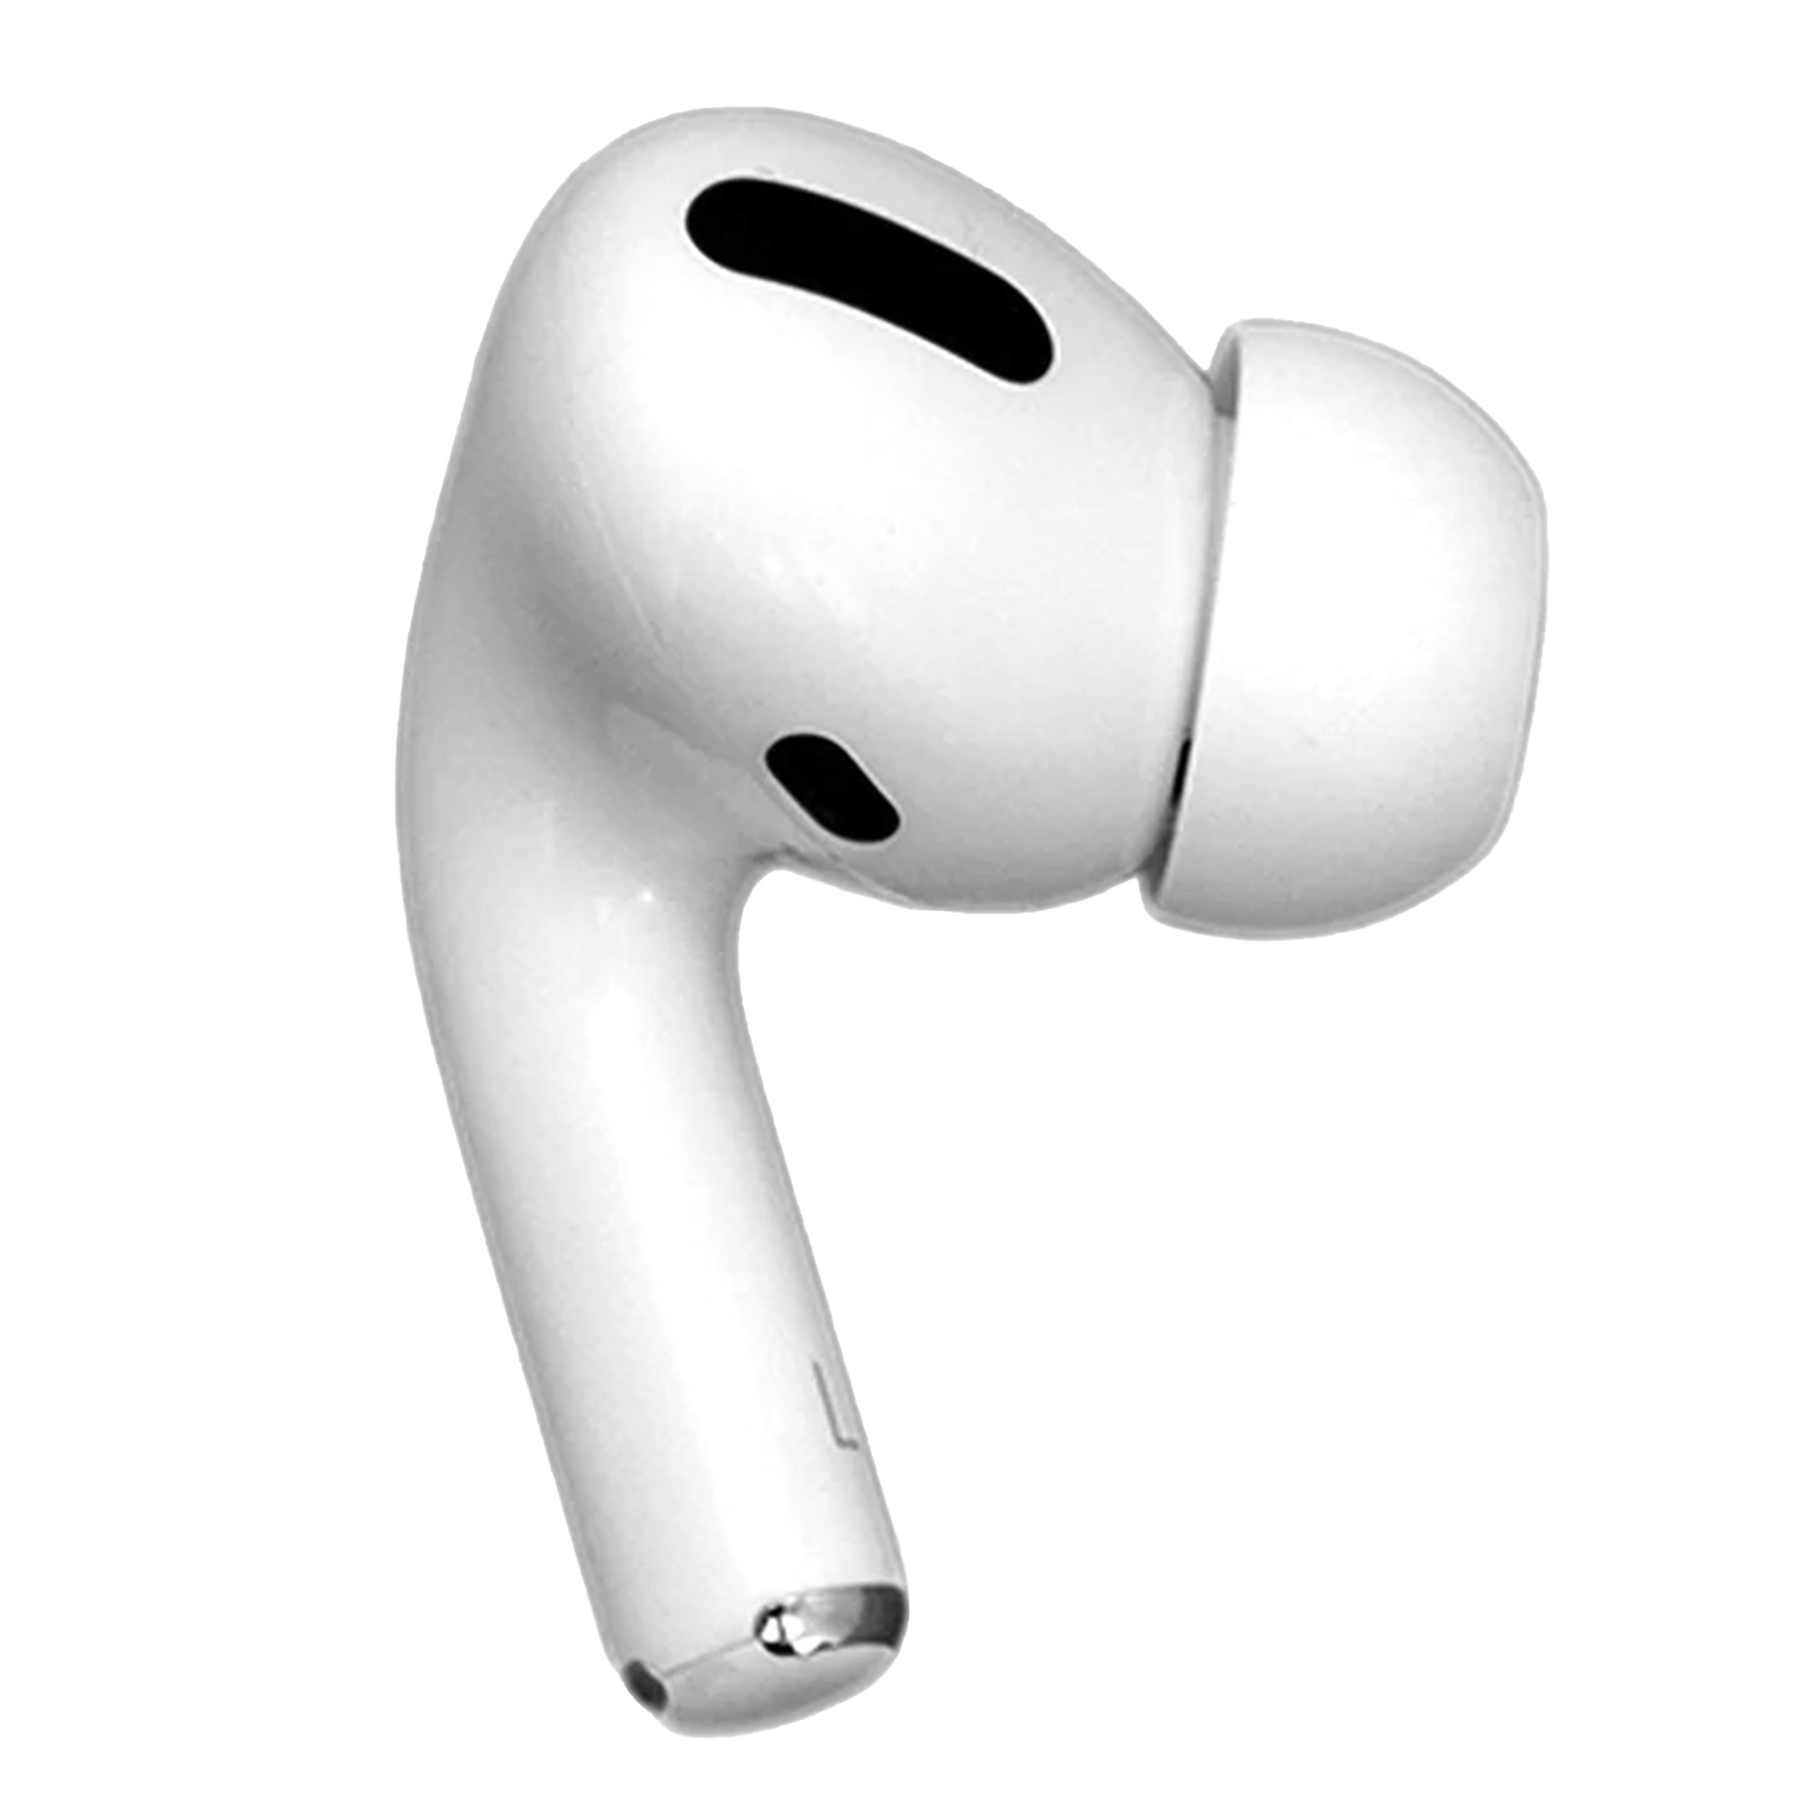 Apple AirPods Pro (1st Generation)